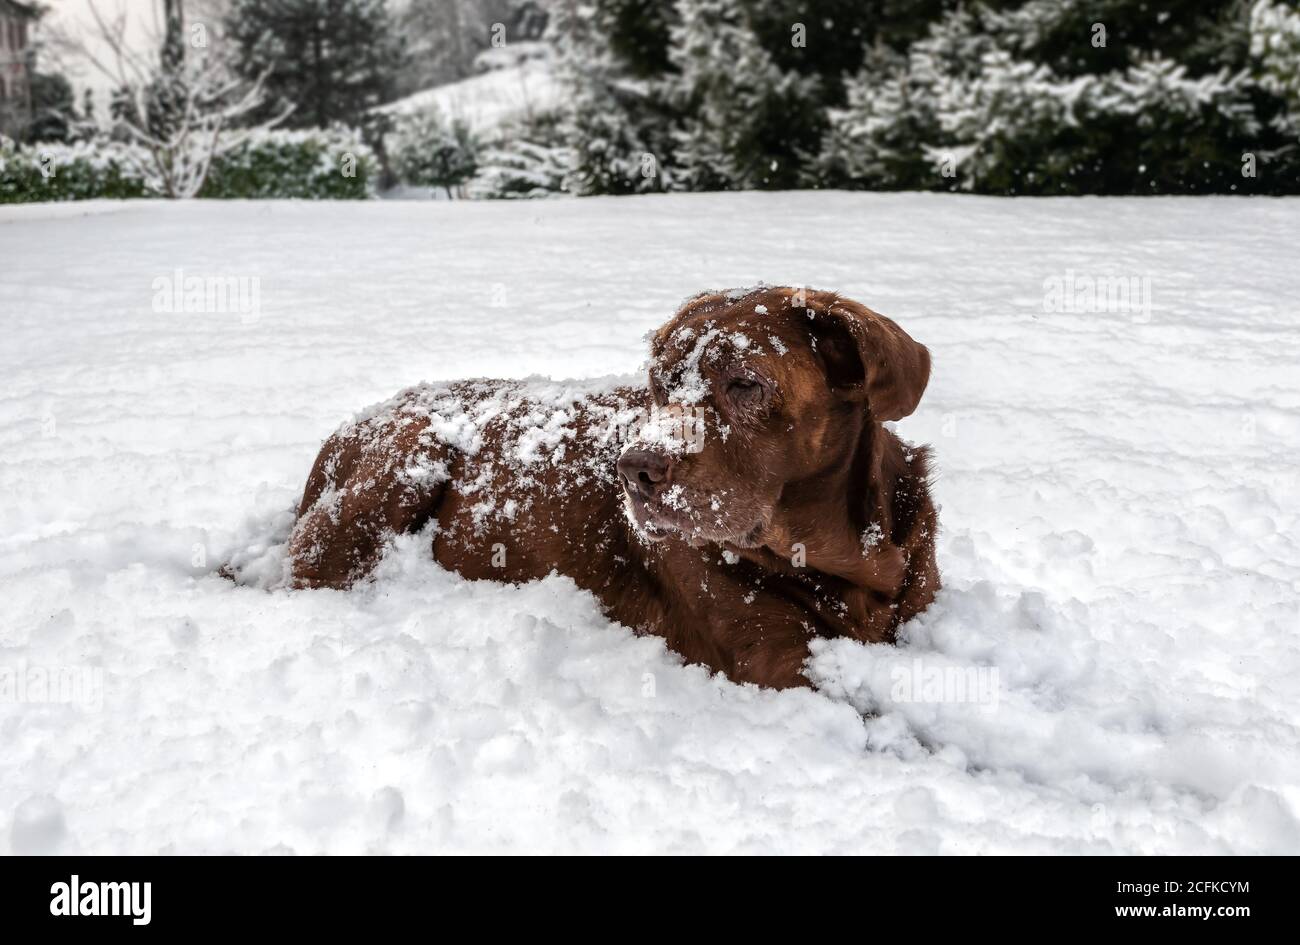 Old Chocolate Labrador Retriever dog lying down in the snow under the snowfall. Stock Photo